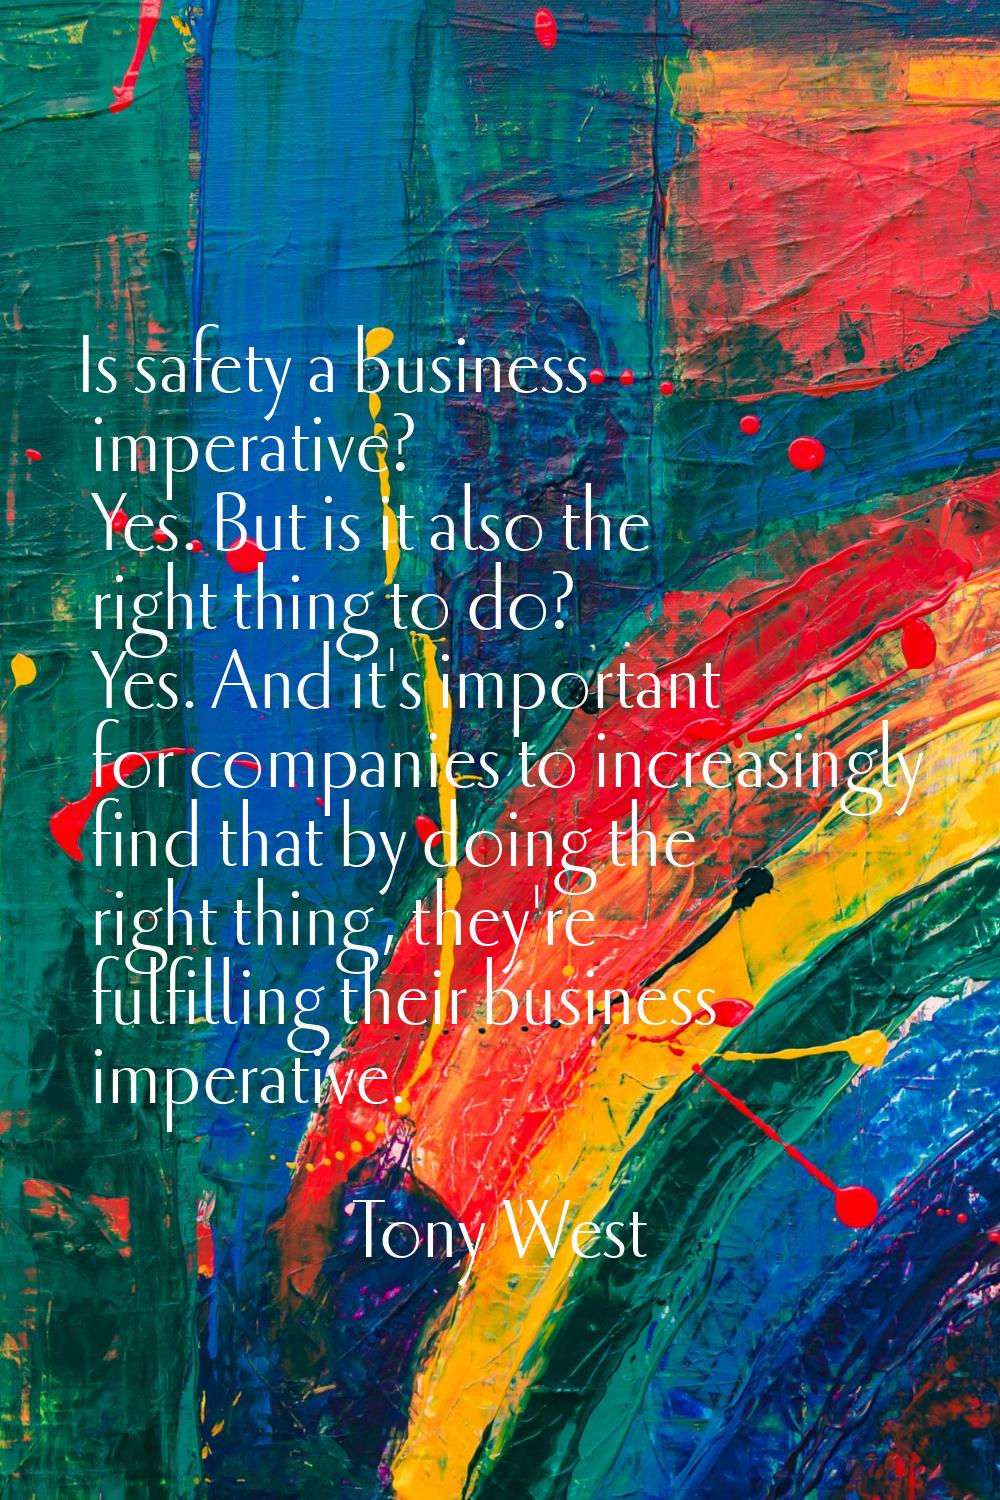 Is safety a business imperative? Yes. But is it also the right thing to do? Yes. And it's important